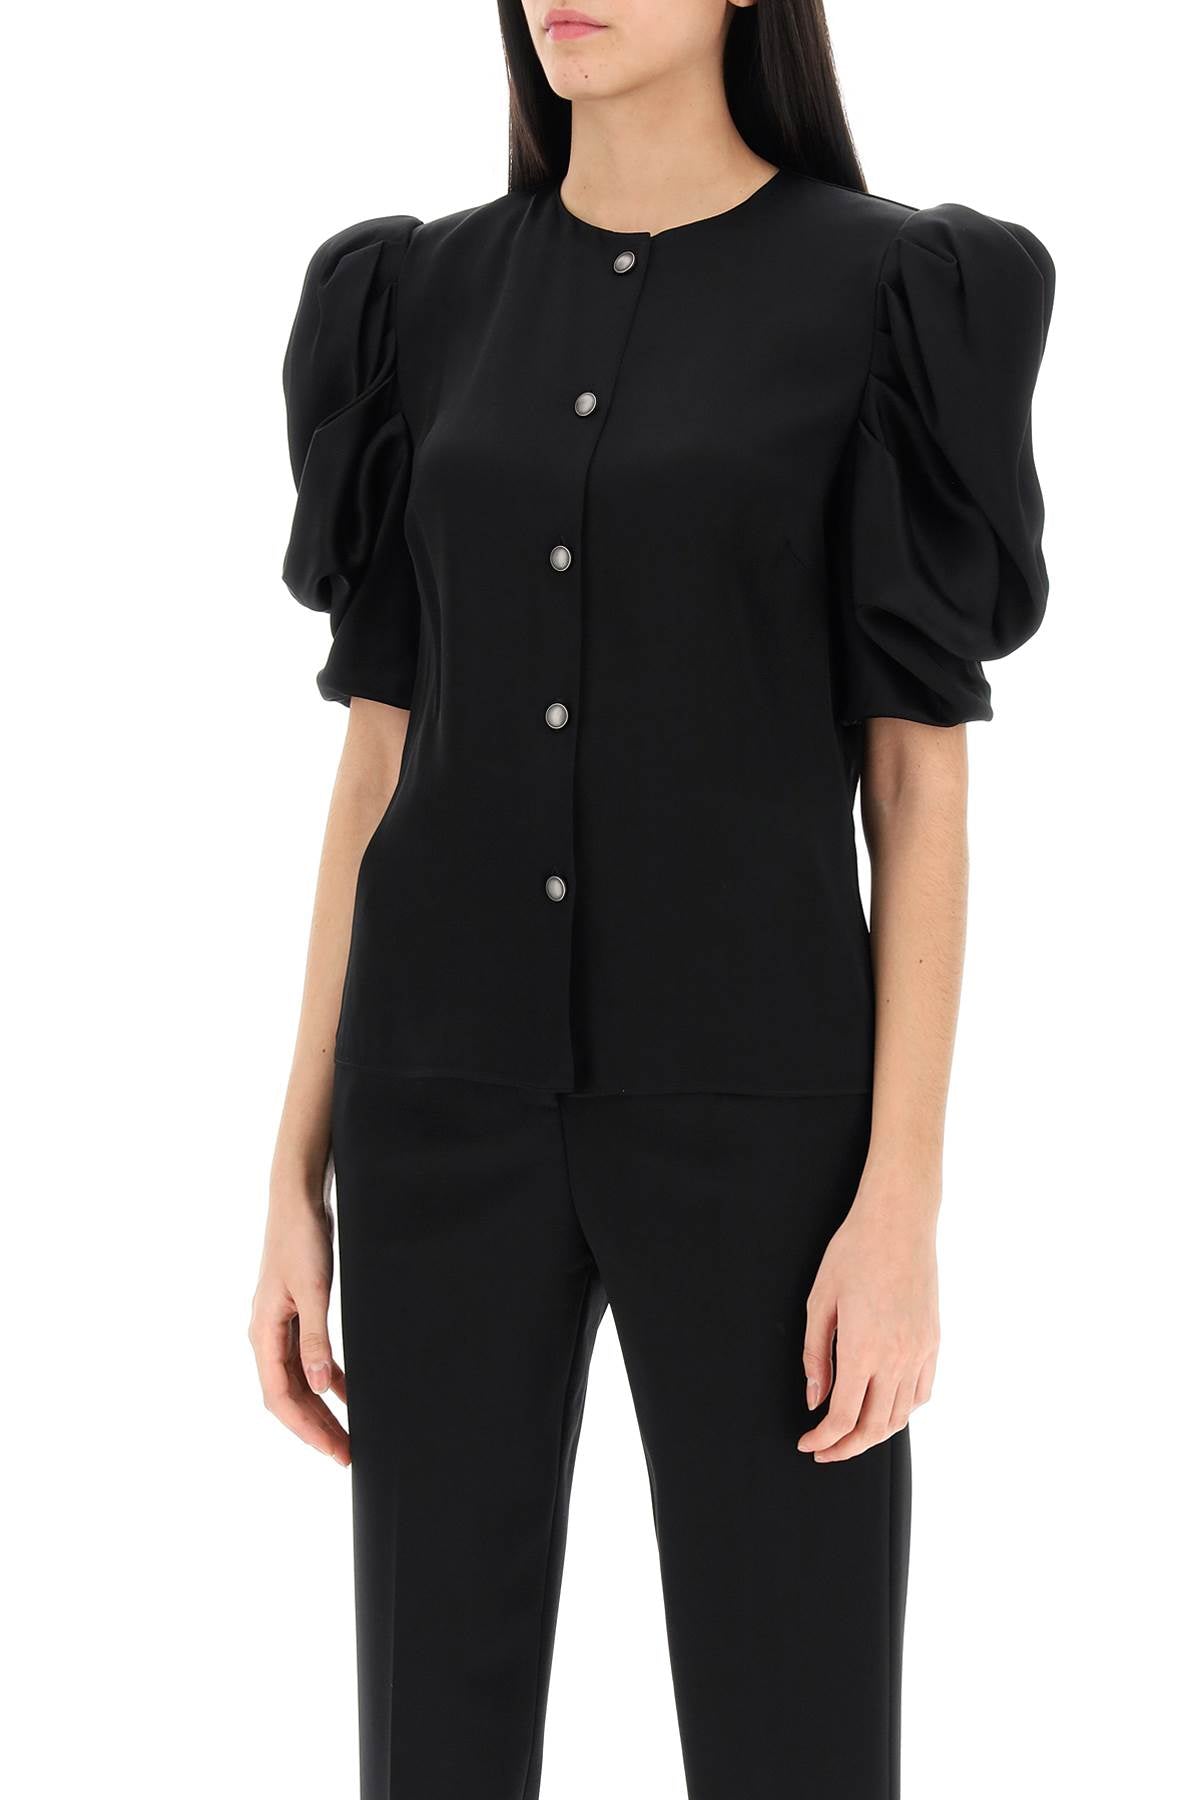 Alessandra rich envers satin blouse with bouffant sleeves-3